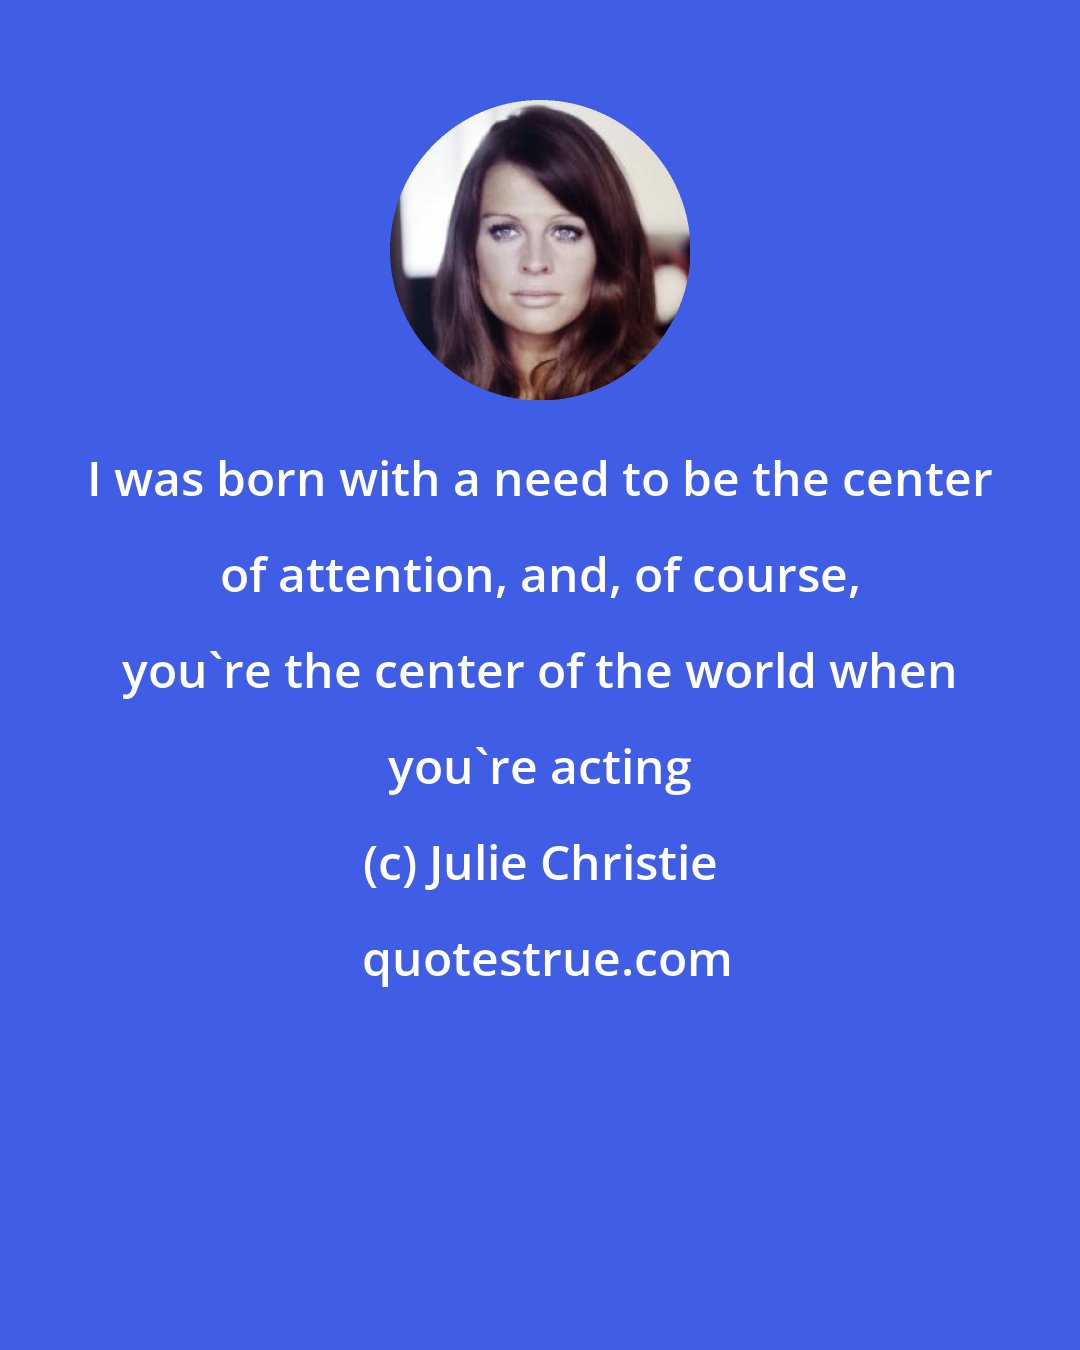 Julie Christie: I was born with a need to be the center of attention, and, of course, you're the center of the world when you're acting